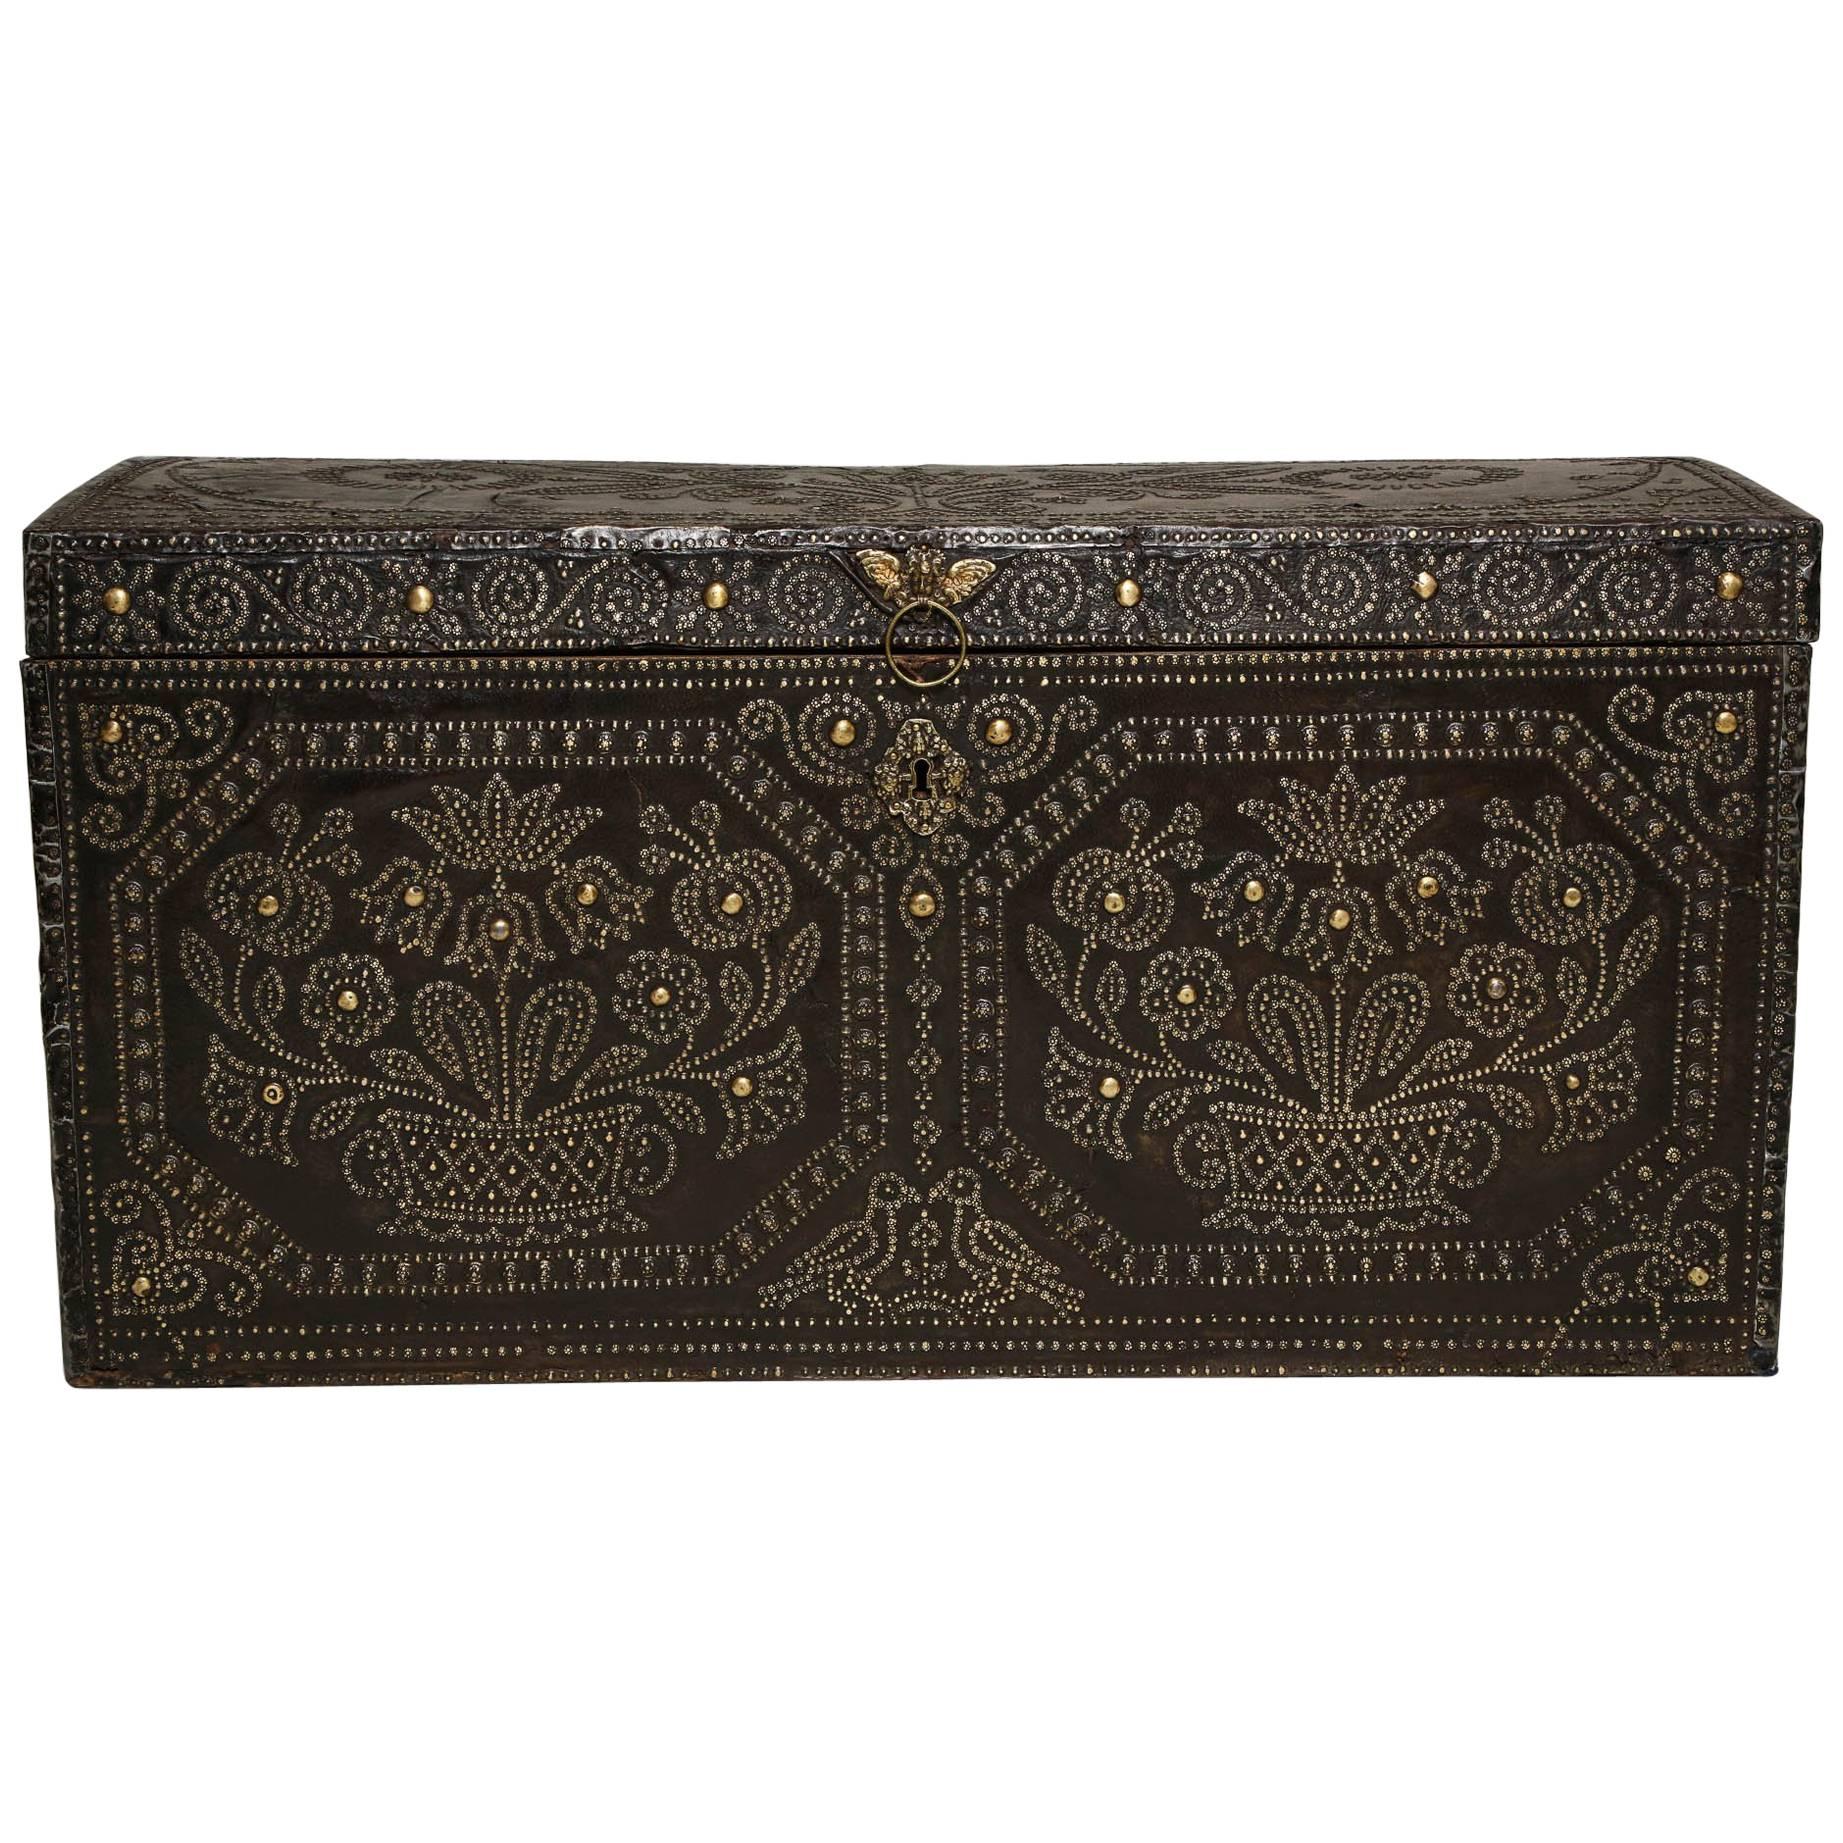 Profusely Studded Royal Leather Trunk